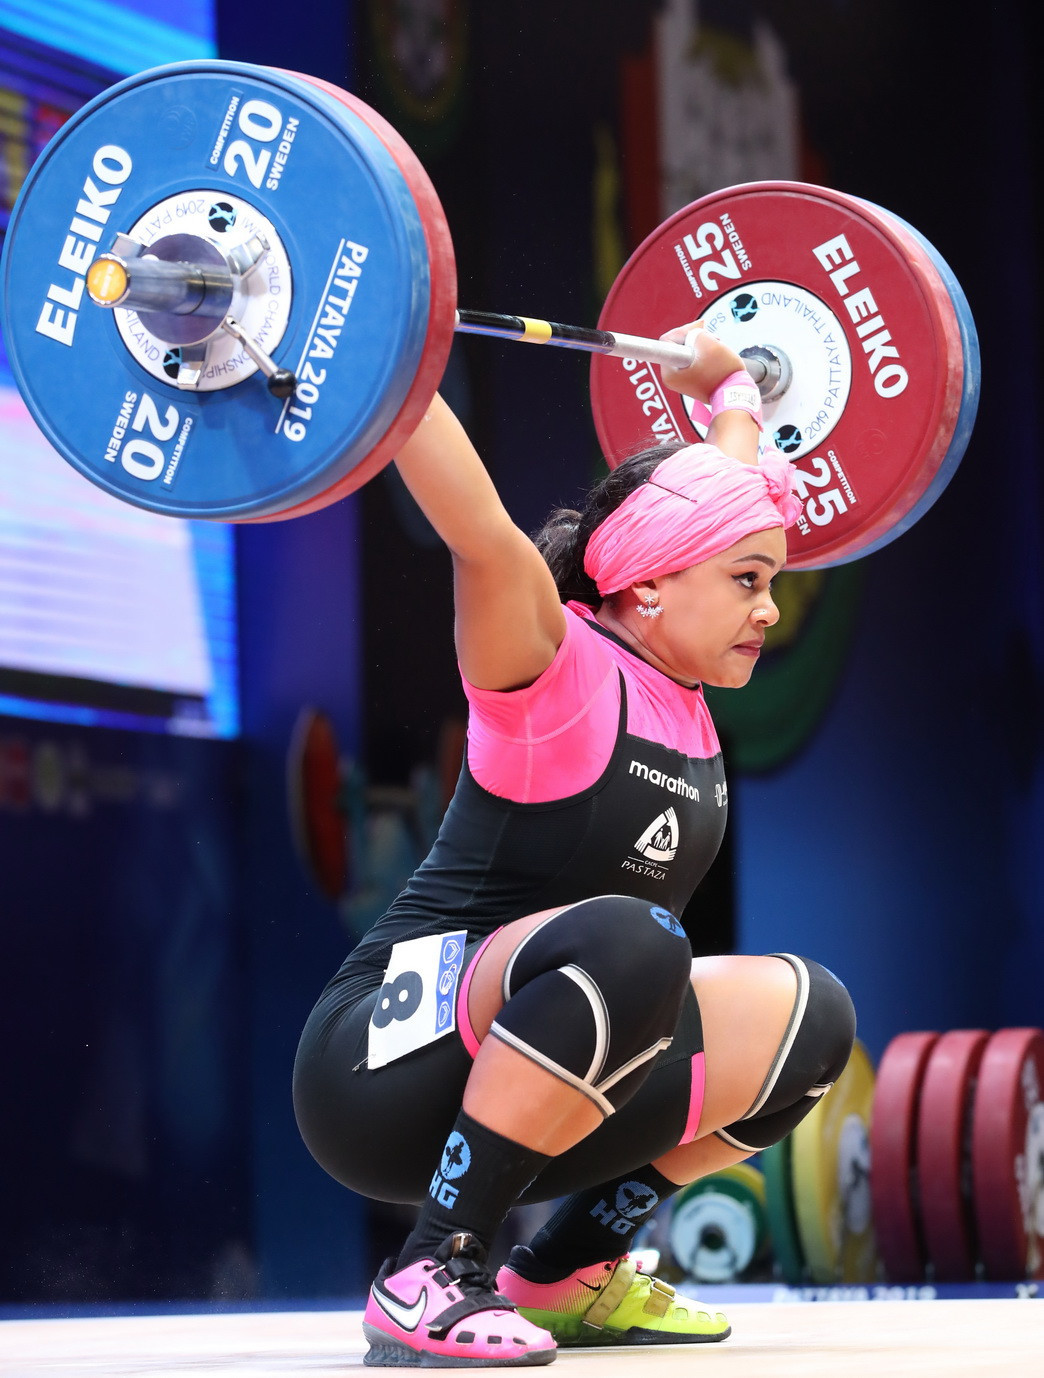 Completing the top three in the total was Ecuador's Neisi Patricia Barrera Dajomes ©IWF